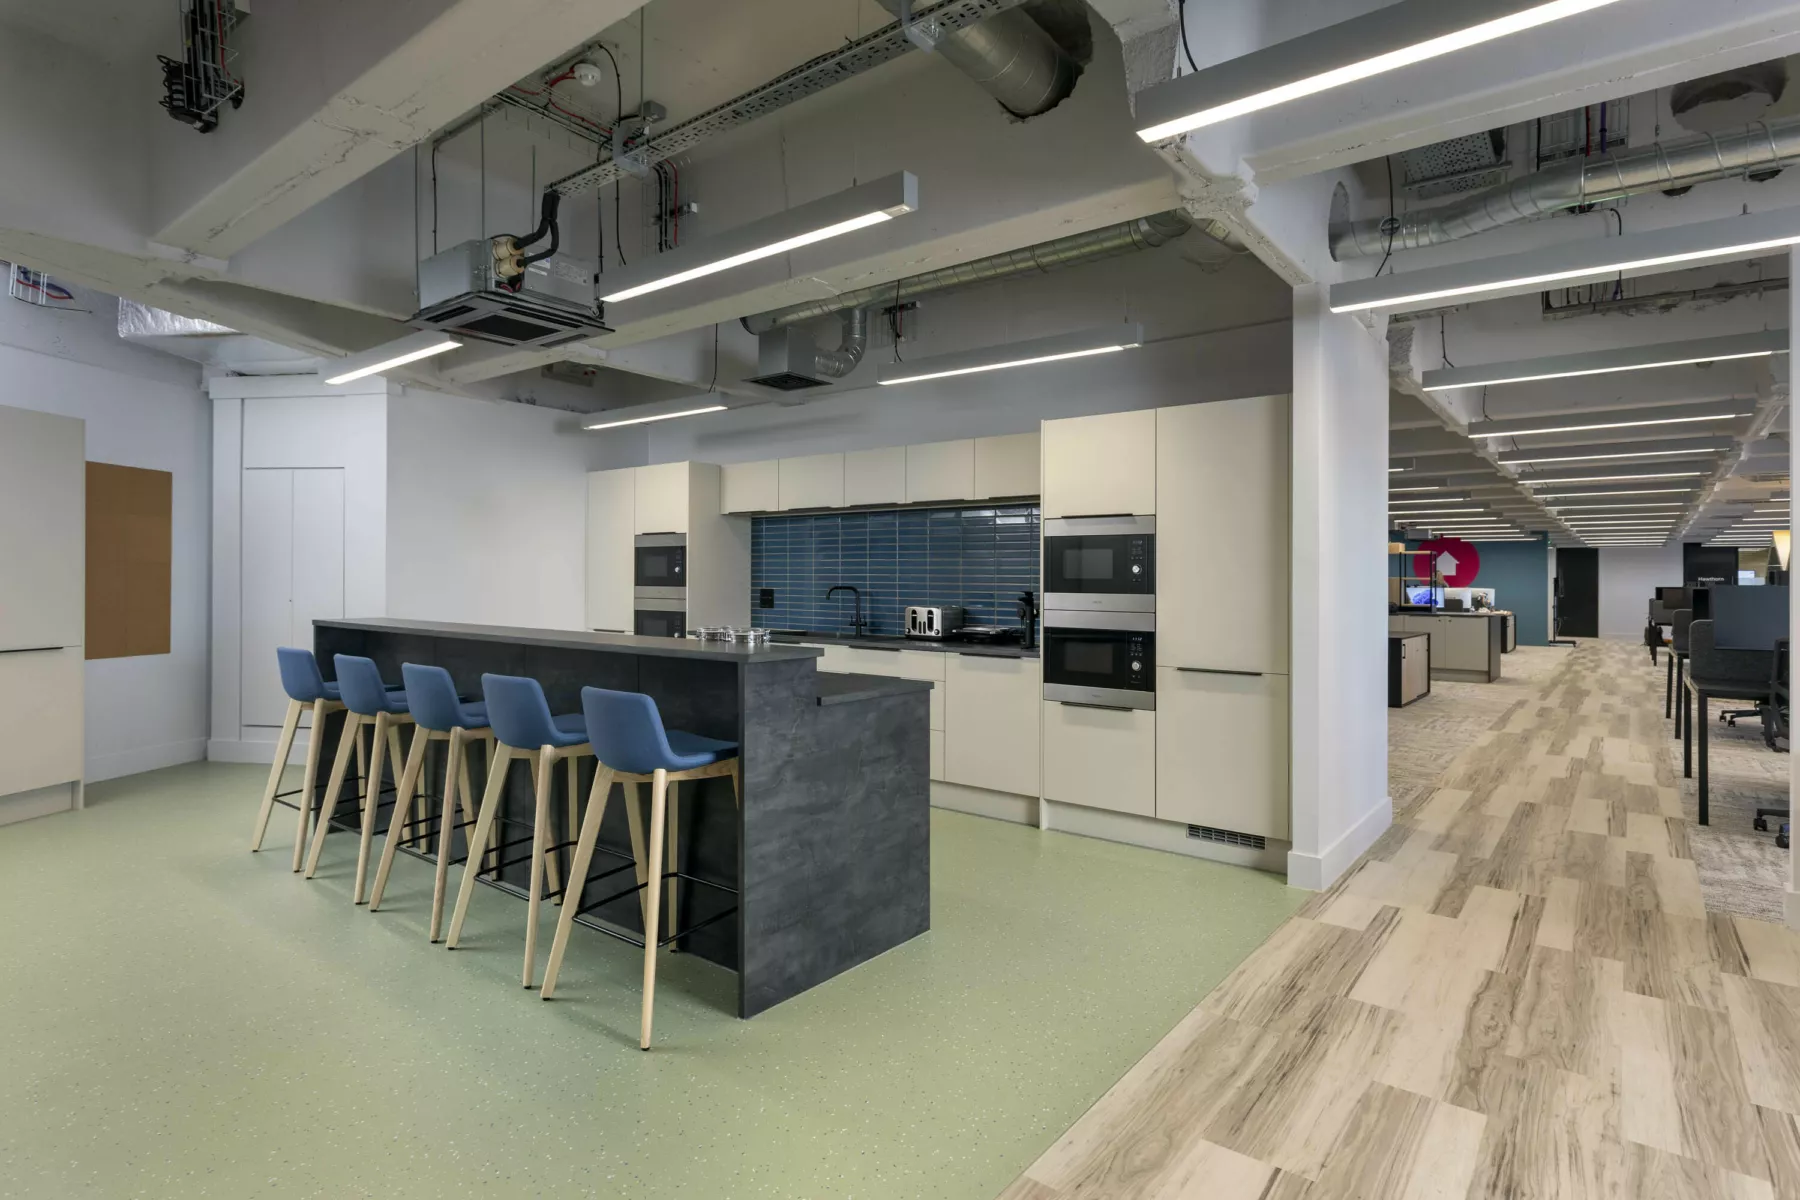 Kitchen area in fully refurbished Cat-B office fit-out for Changeworks, Edinburgh. Bar with high seats, mixed flooring and defurbishment style ceiligh with exposed services.